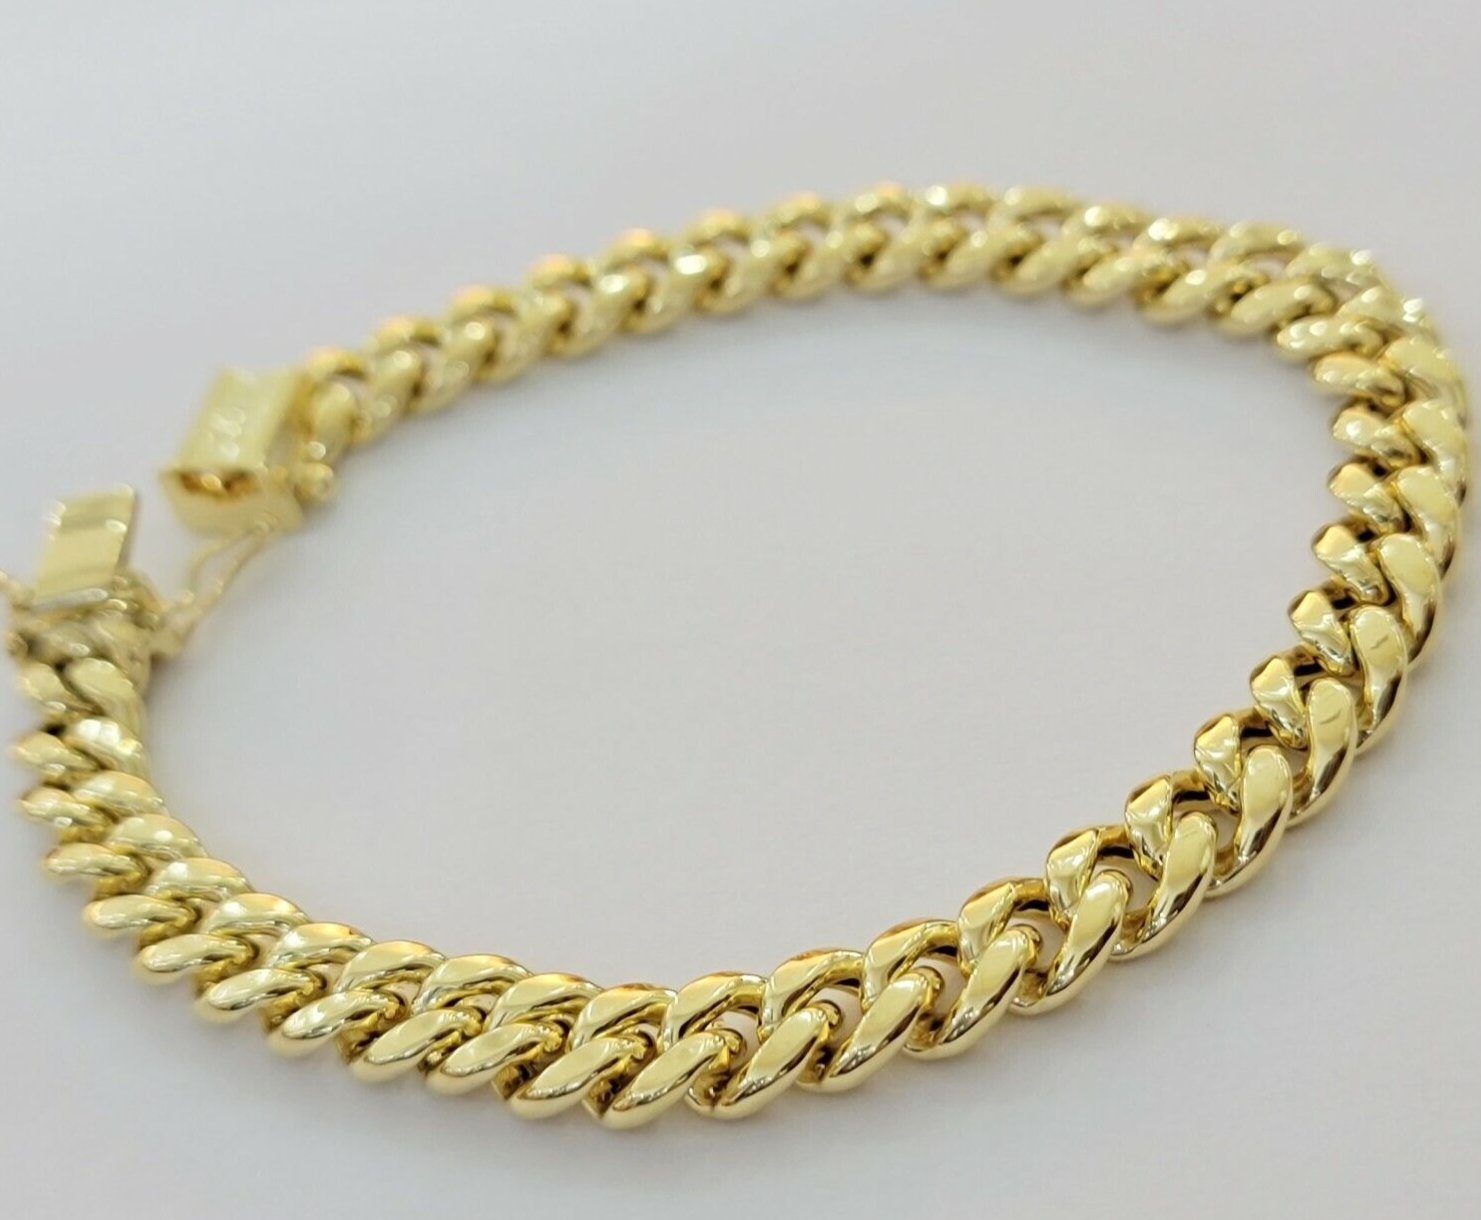 Real 14k Gold Bracelet 9 inch 8mm Miami Cuban Link Box Clasp Strong 14kt , Men's